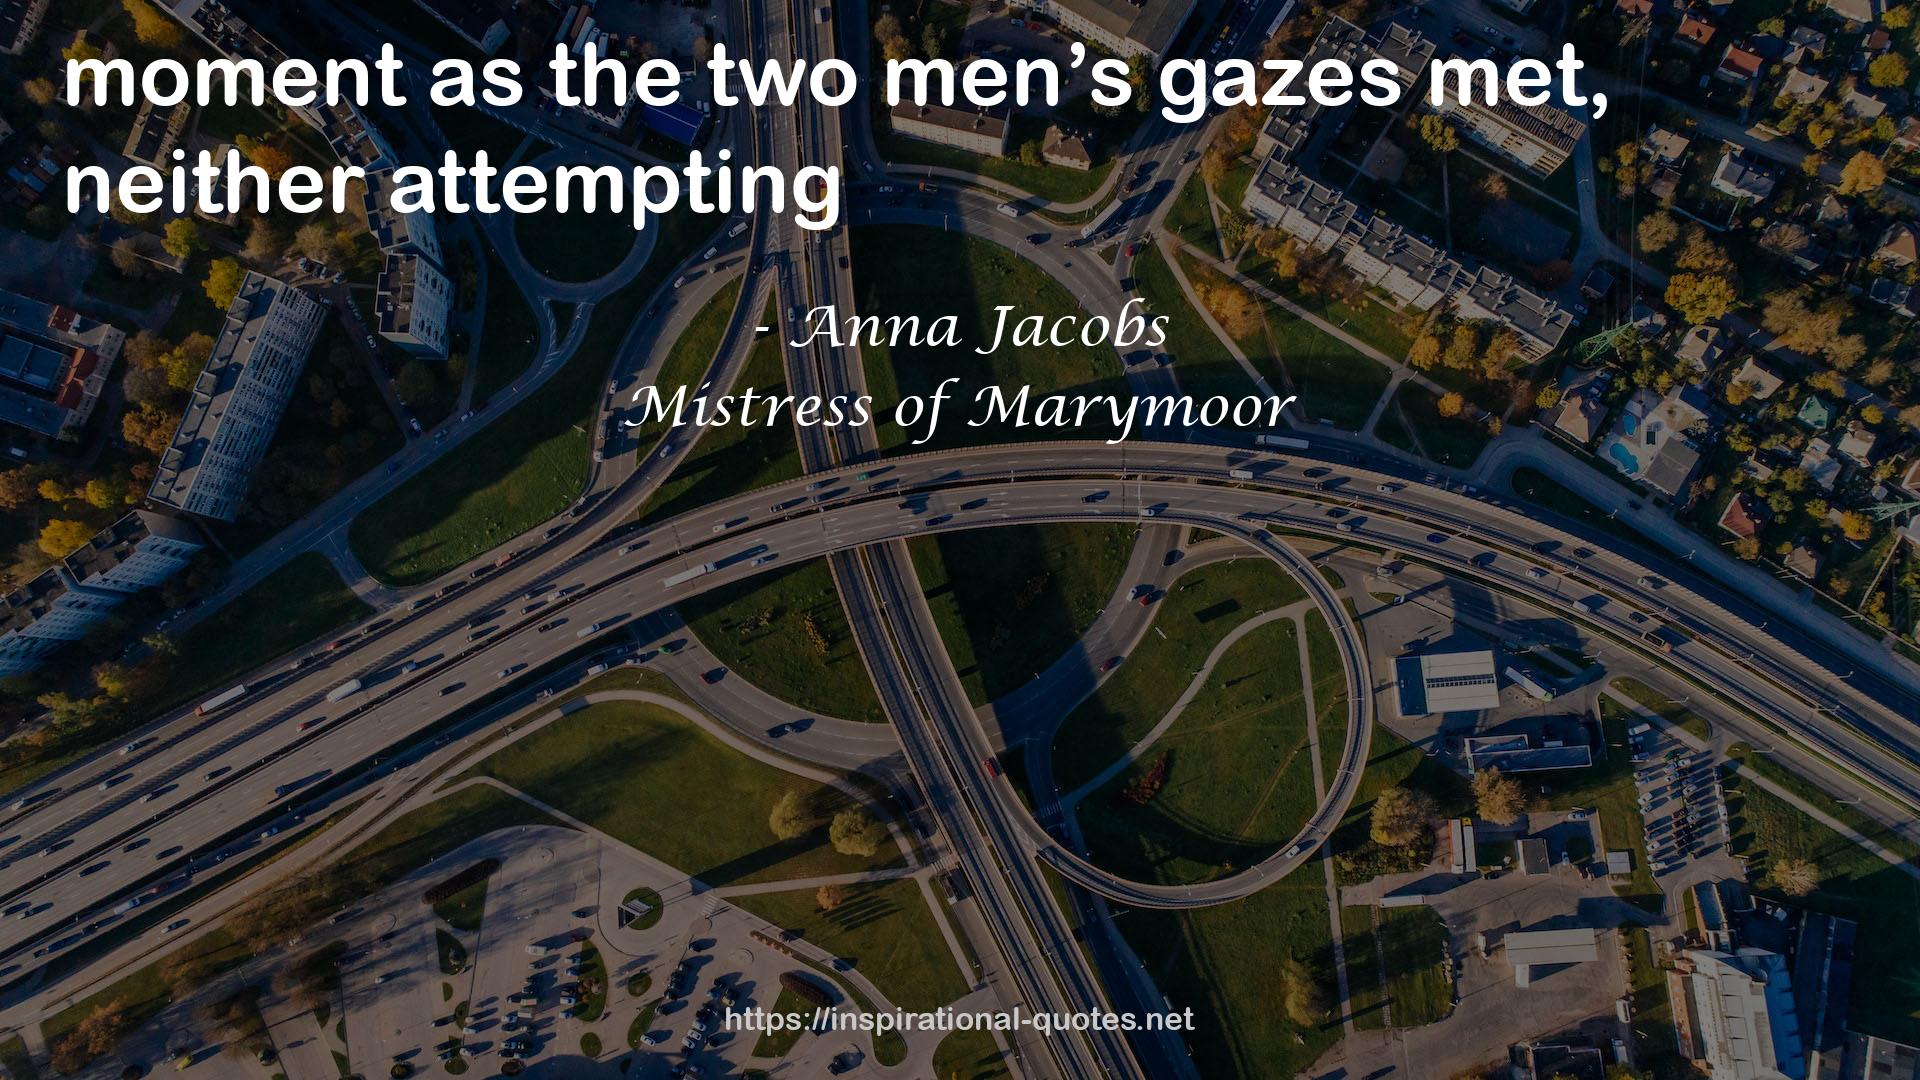 Mistress of Marymoor QUOTES